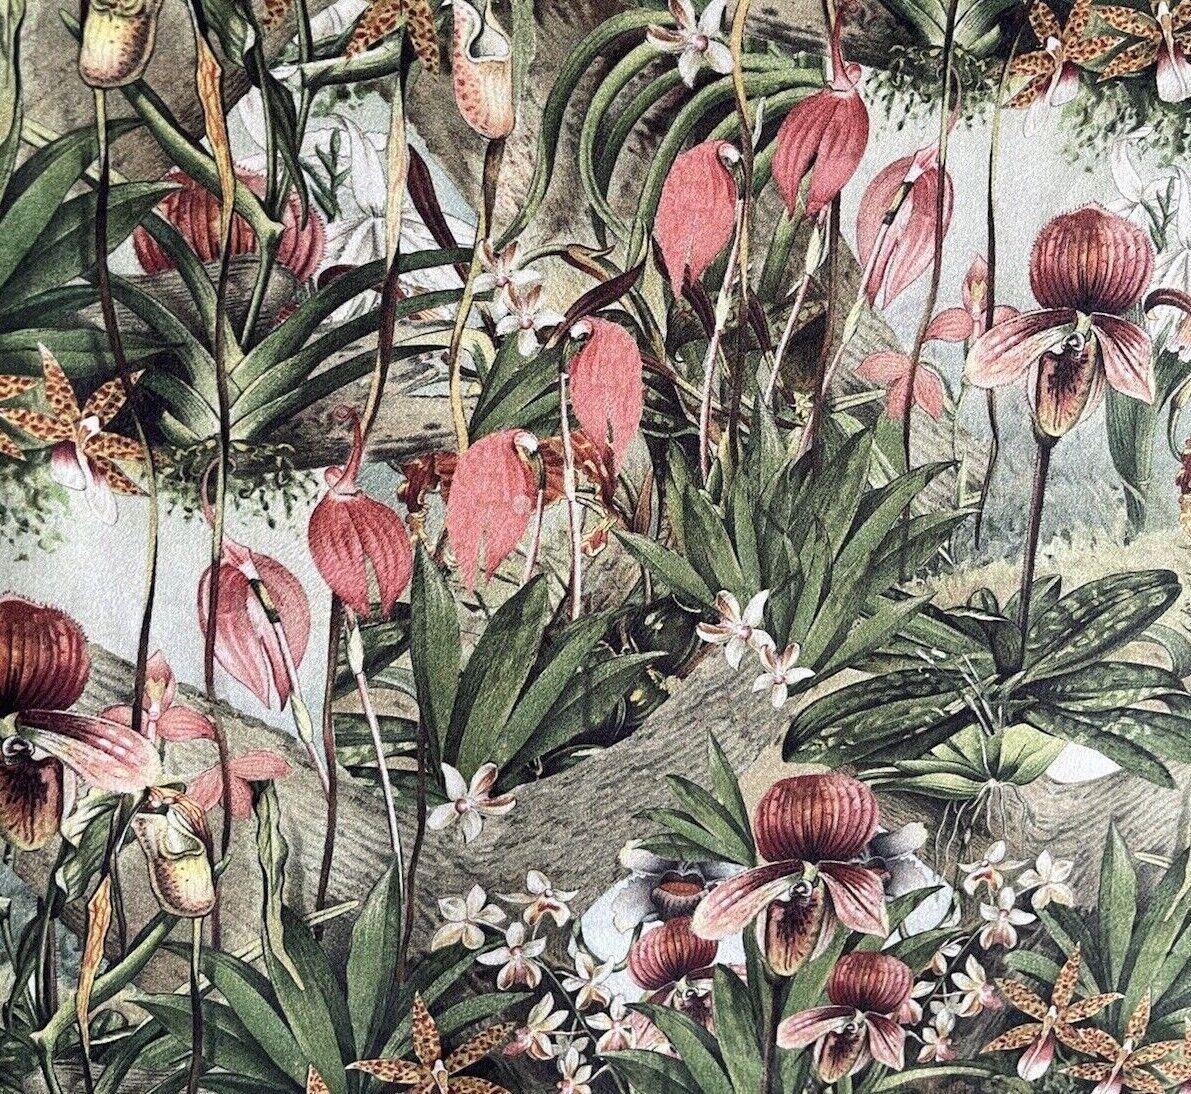 Wilde Orchids Printed Velvet Fabric by Meter Flowers Print Sewing Material Sold Per Yards Metres Green Botanical Textile For Upholstery PillowsYellow Pink Peach